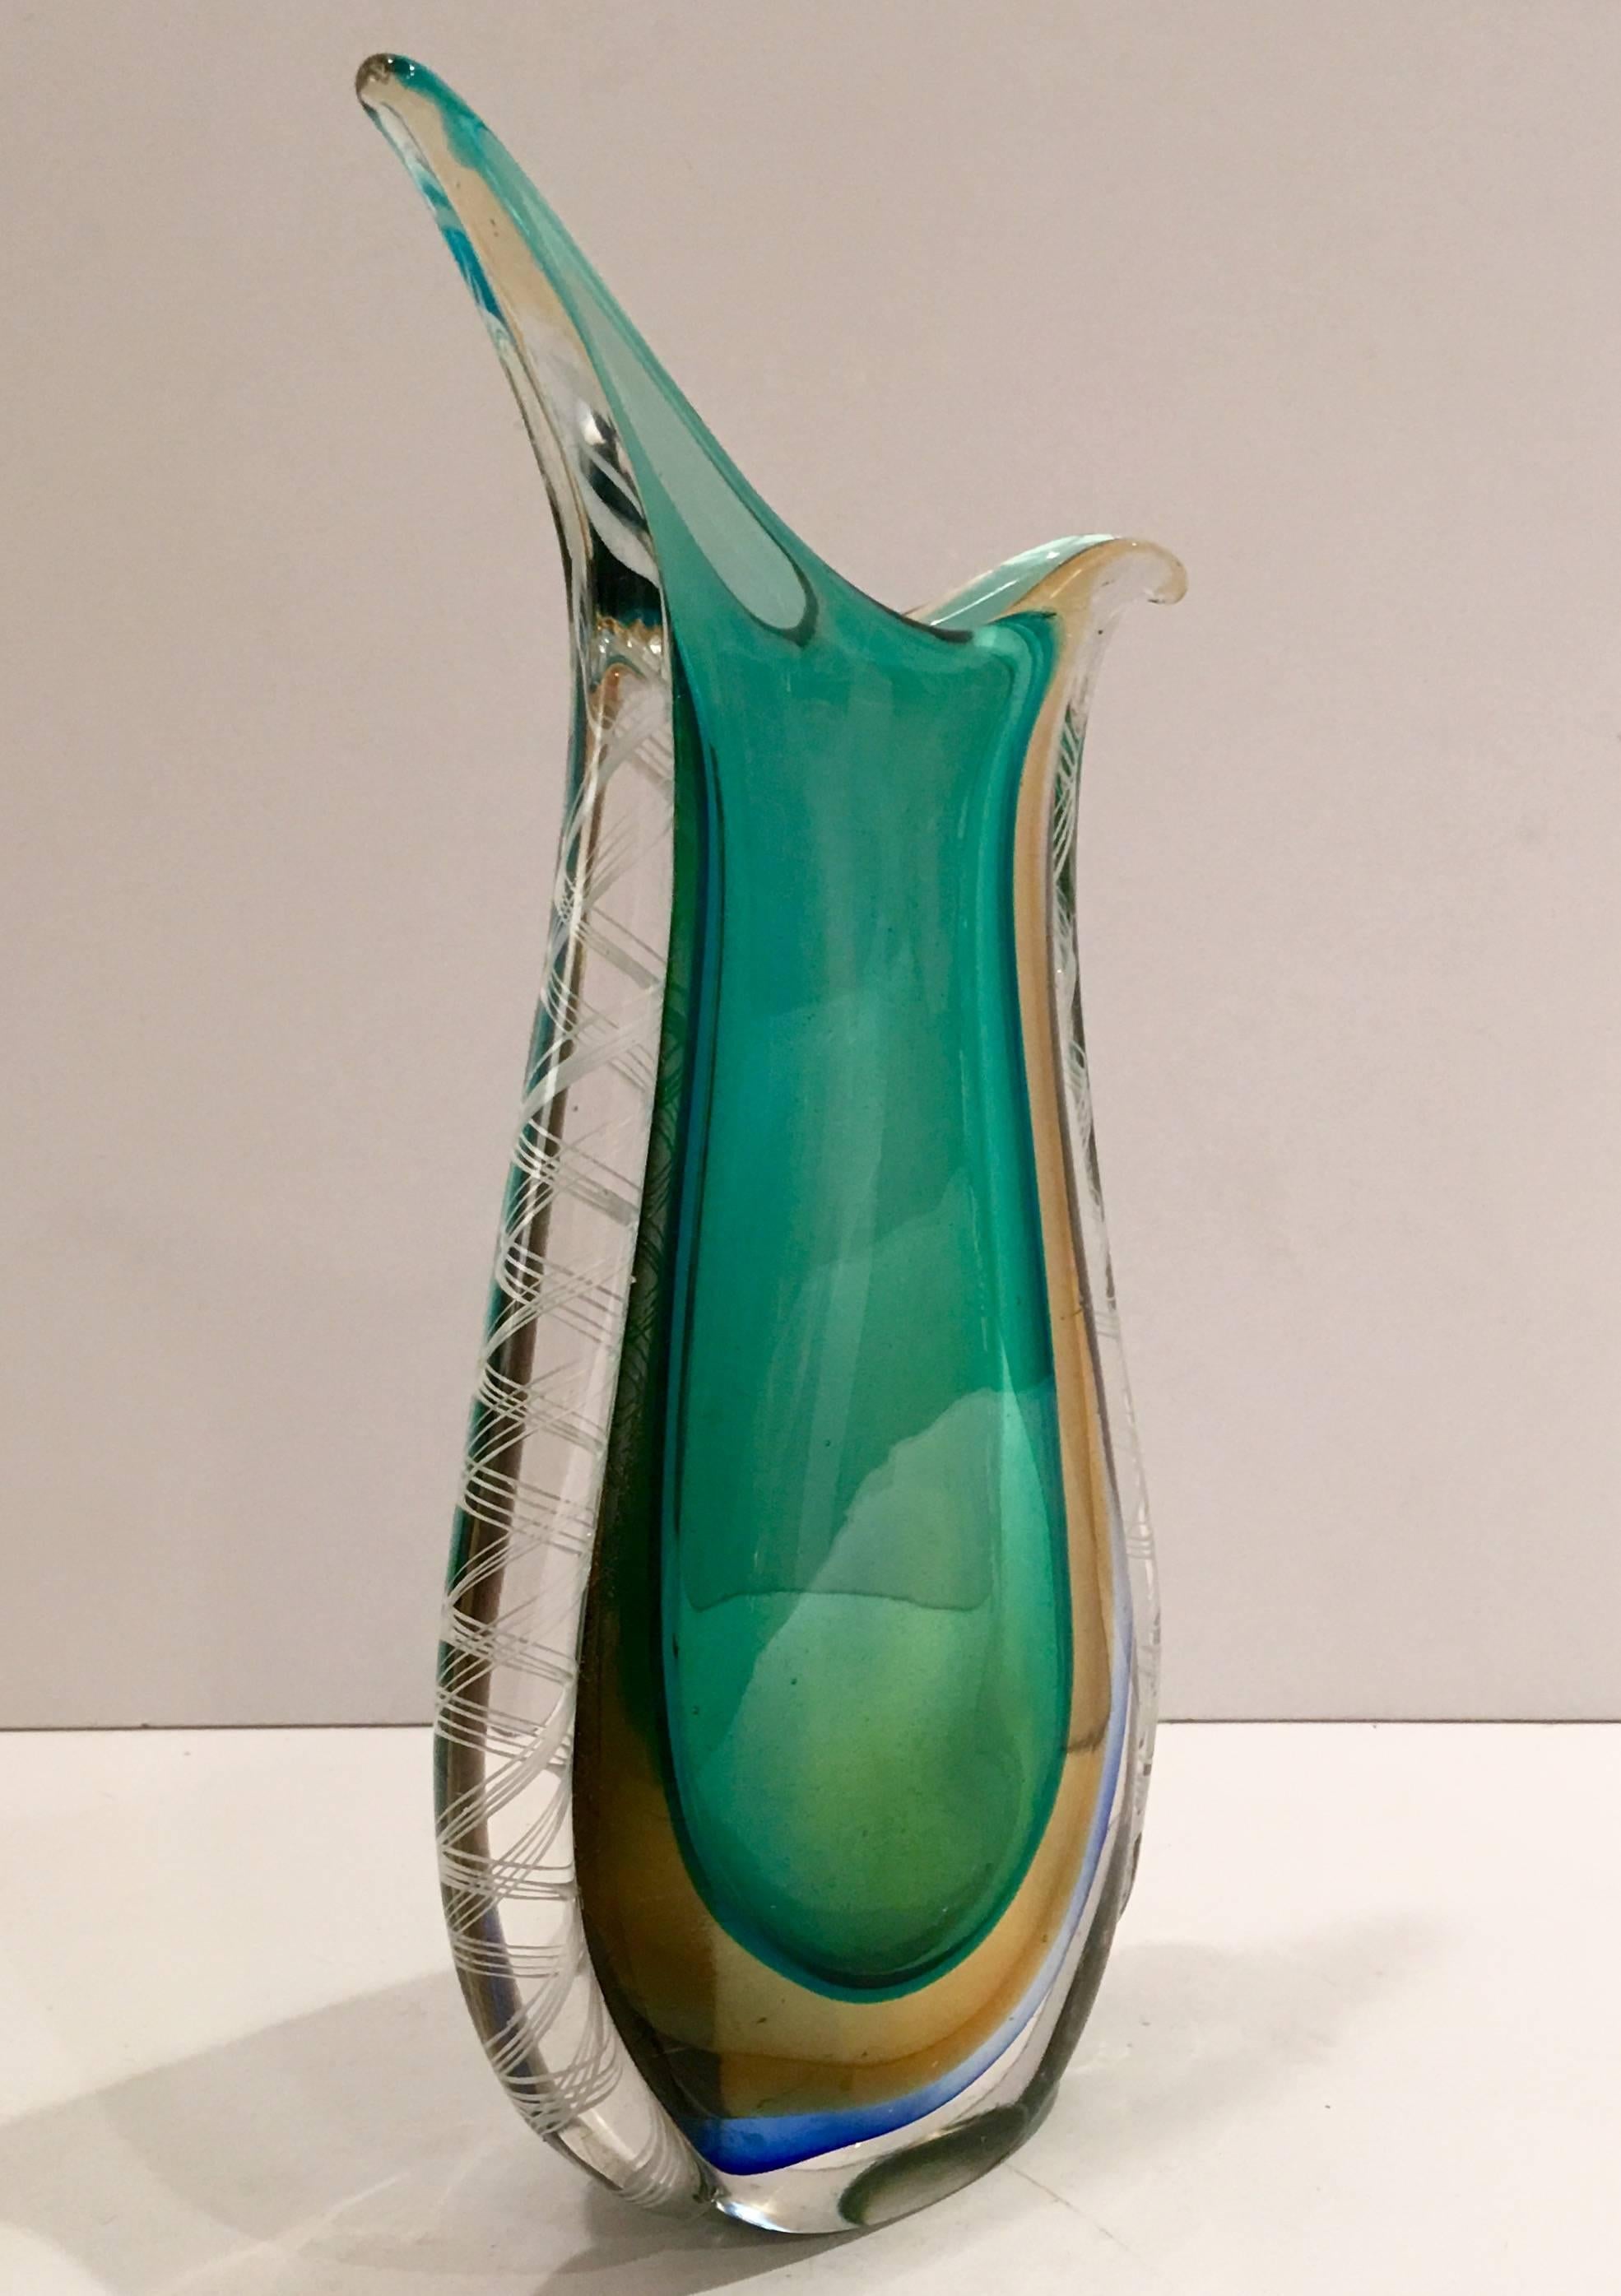 1970s Flavio Poli style Italian rare Murano glass Sommerso four color case glass vase in emerald green, gold, cobalt blue and clear with white lattice side detail and double flair opening.